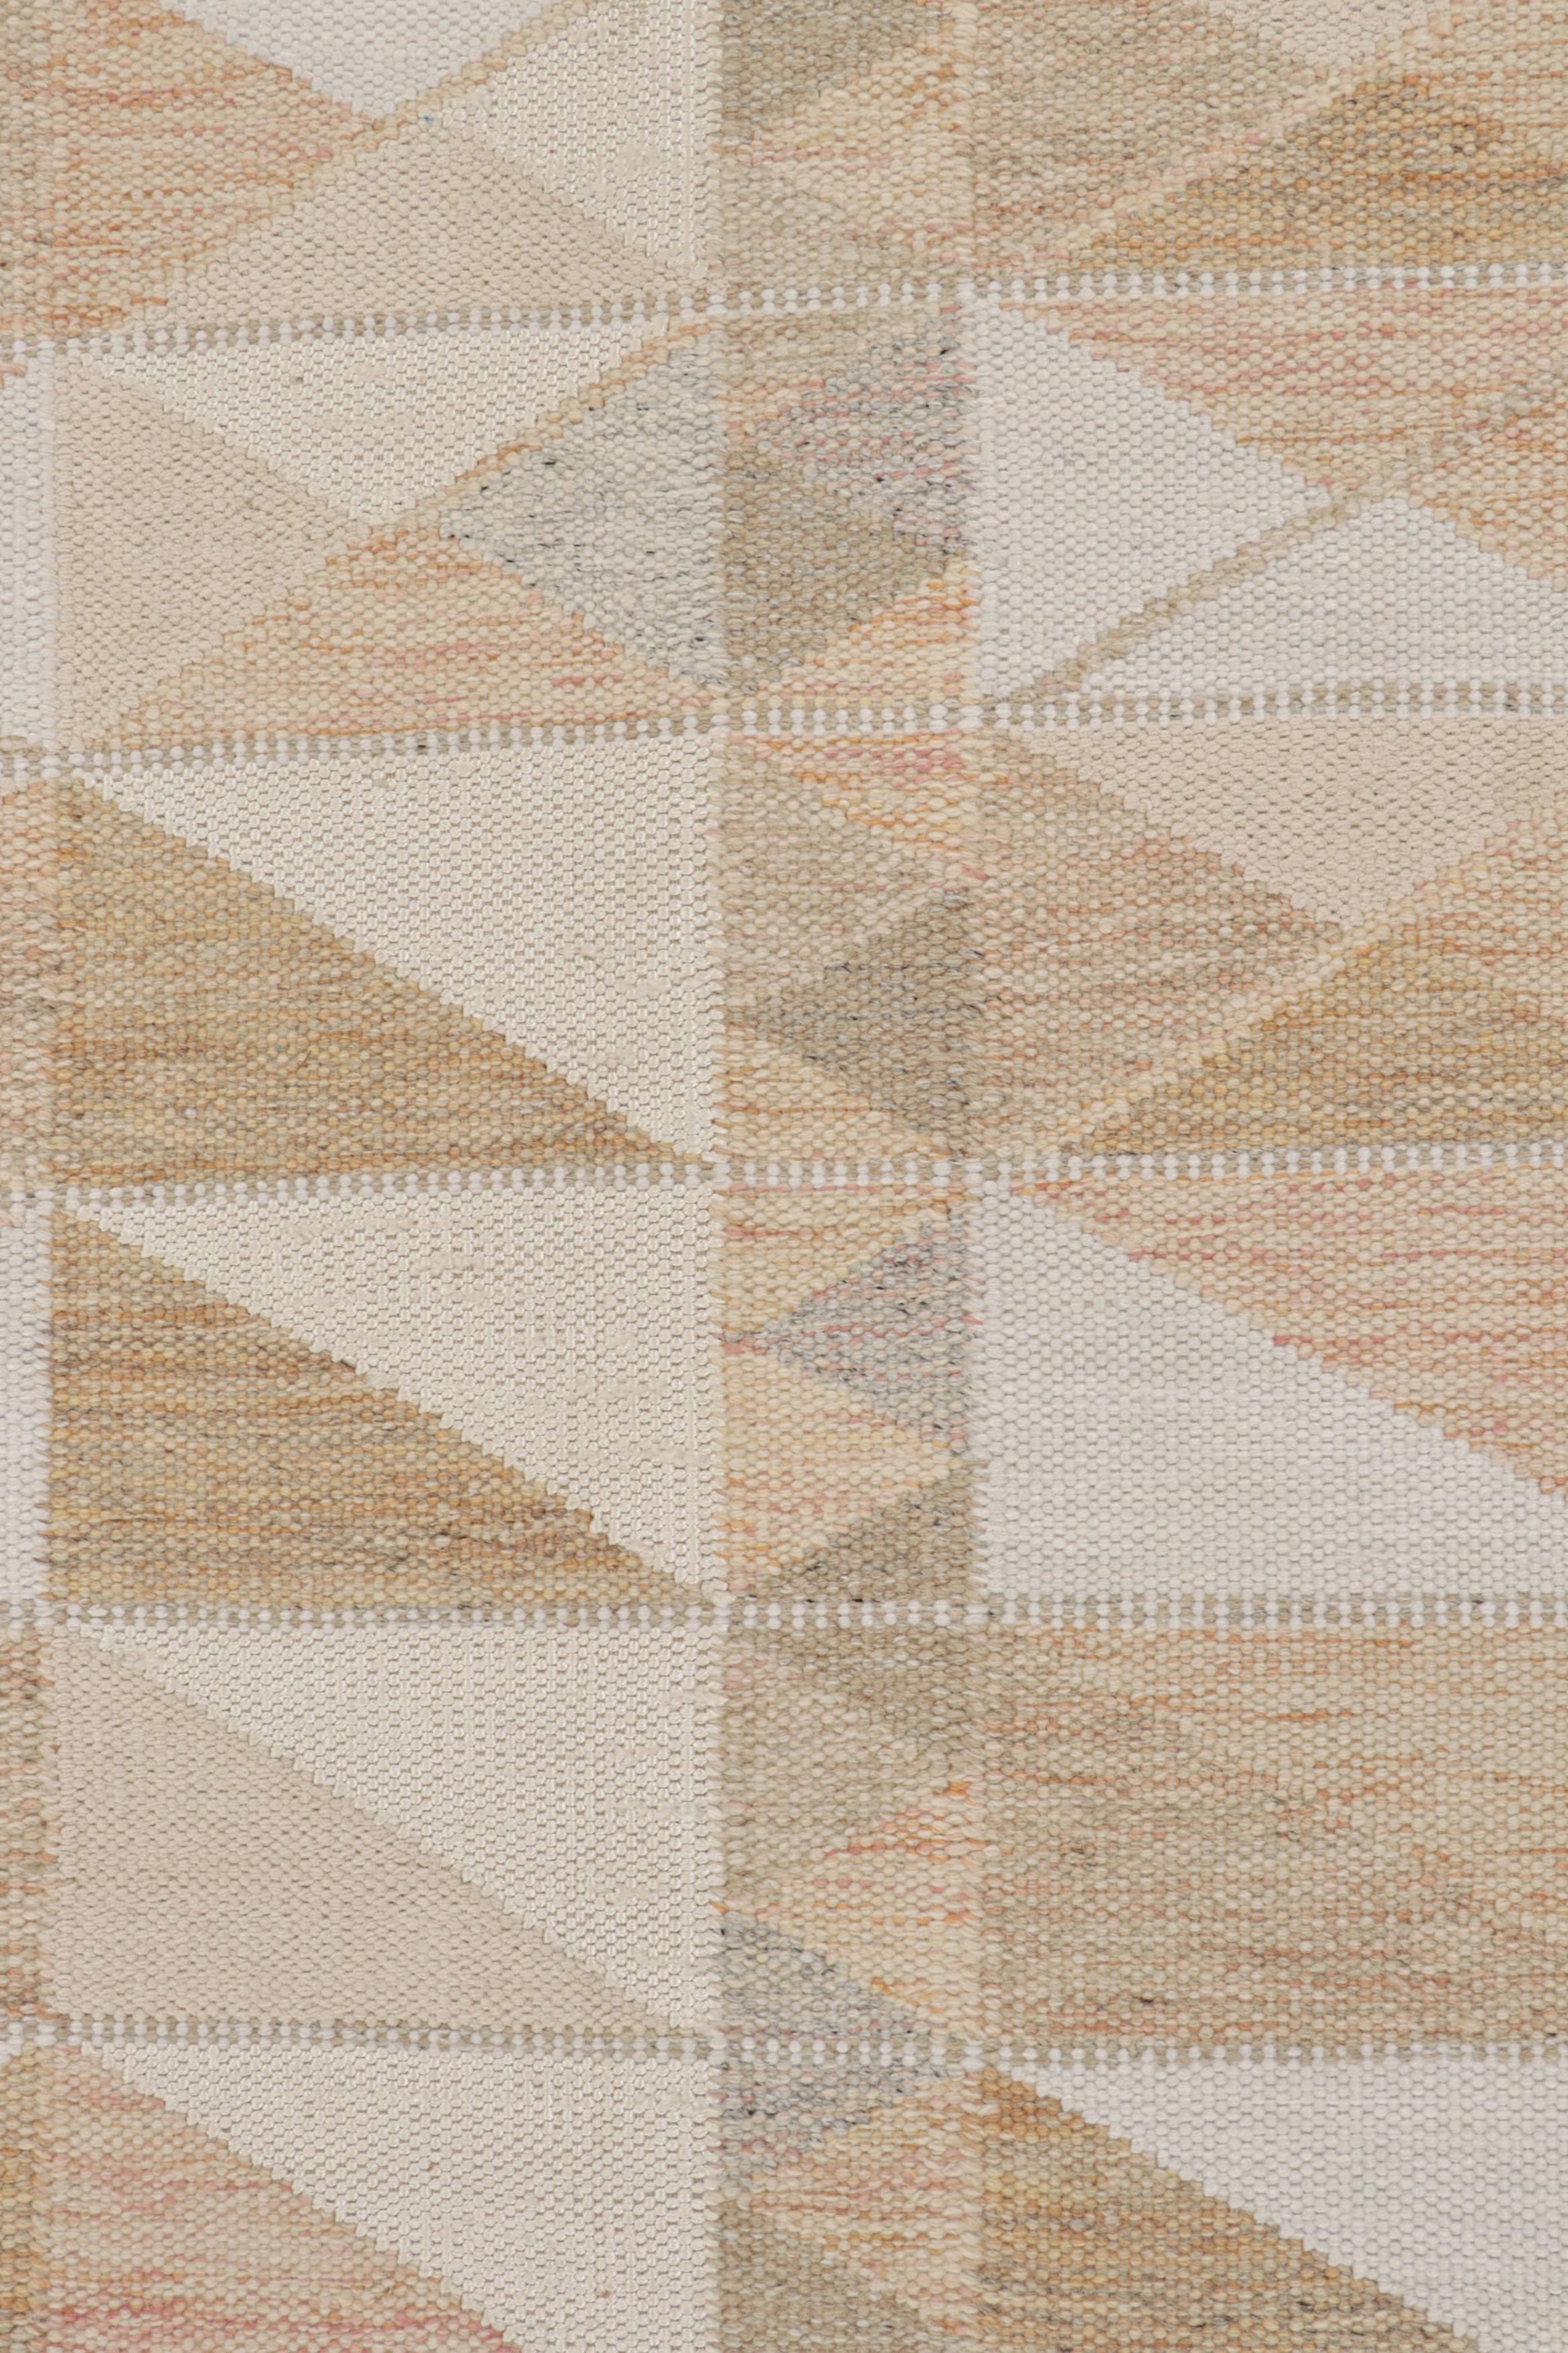 Rug & Kilim’s Scandinavian Style Kilim in Beige & Ivory Geometric Patterns In New Condition For Sale In Long Island City, NY